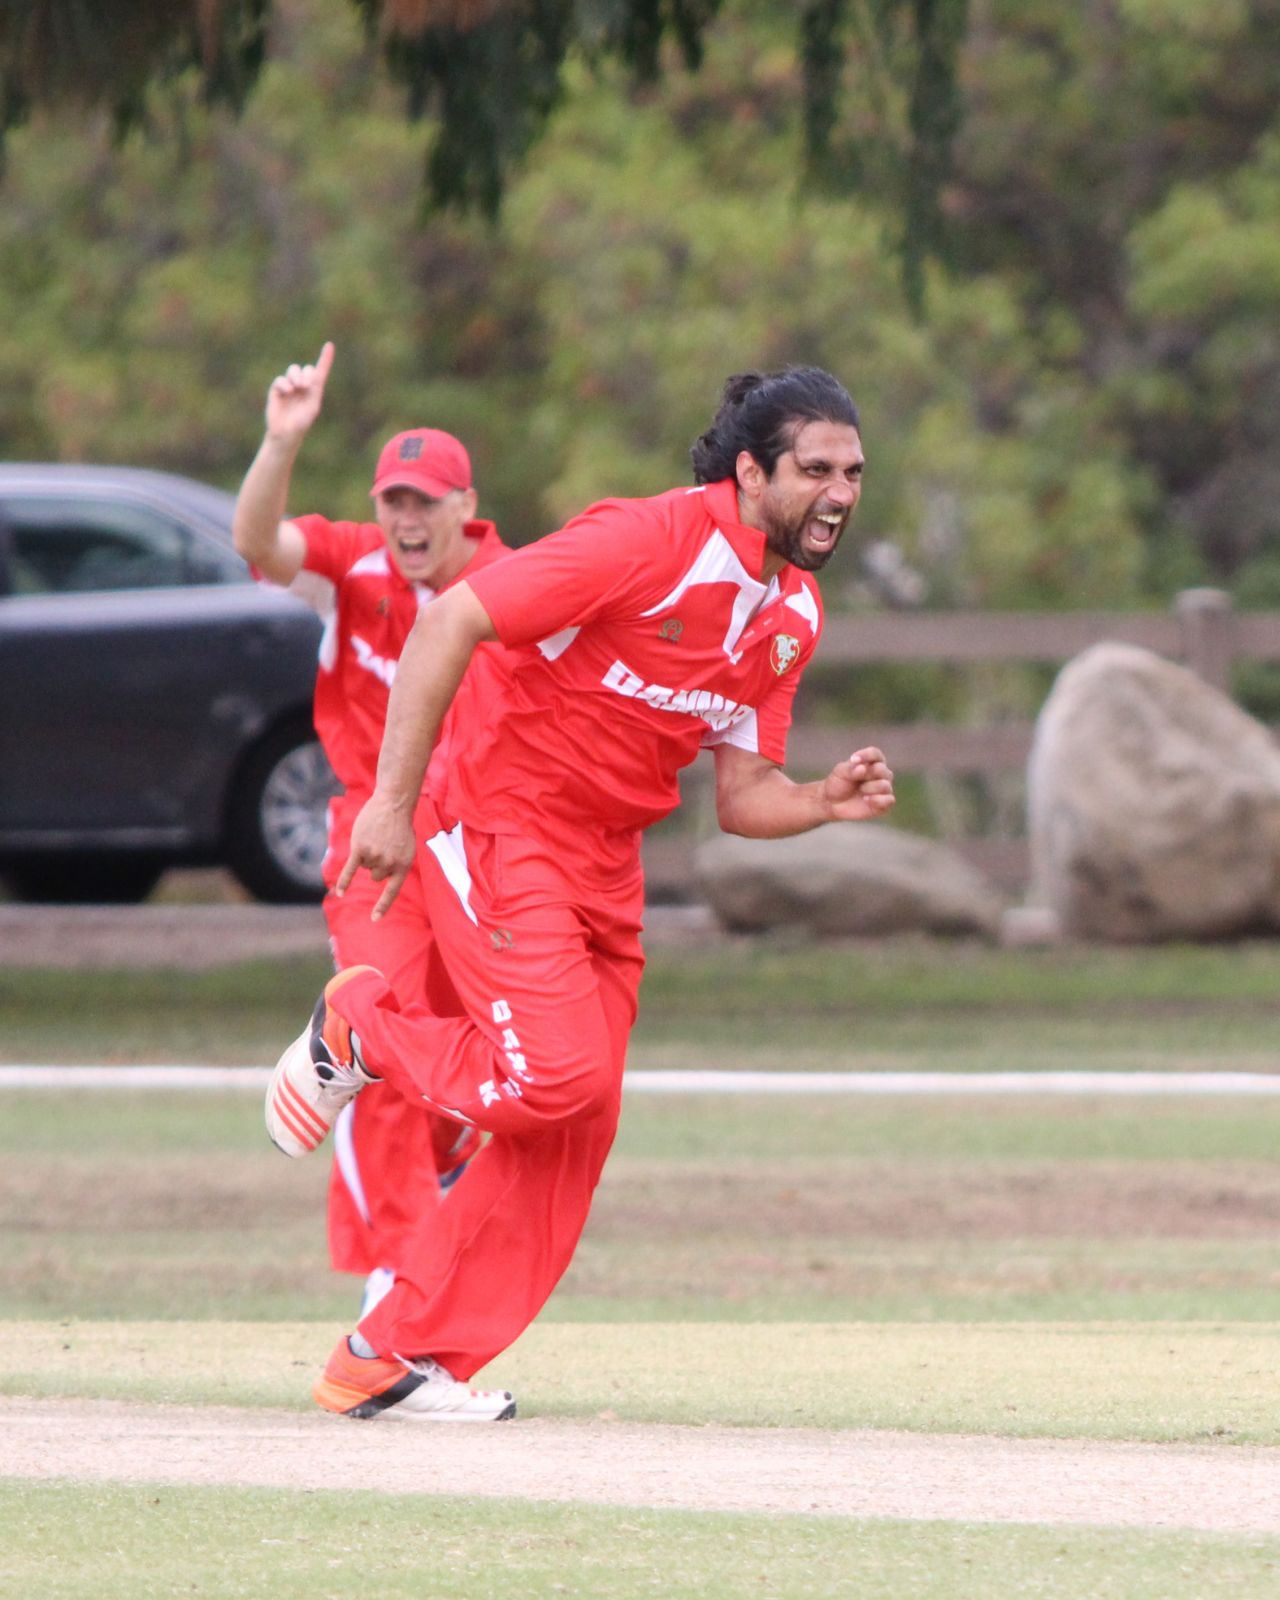 Amjad Khan celebrates the wicket of Manpreet Singh, Denmark v Italy, ICC World Cricket League Division Four, Los Angeles, October 29, 2016